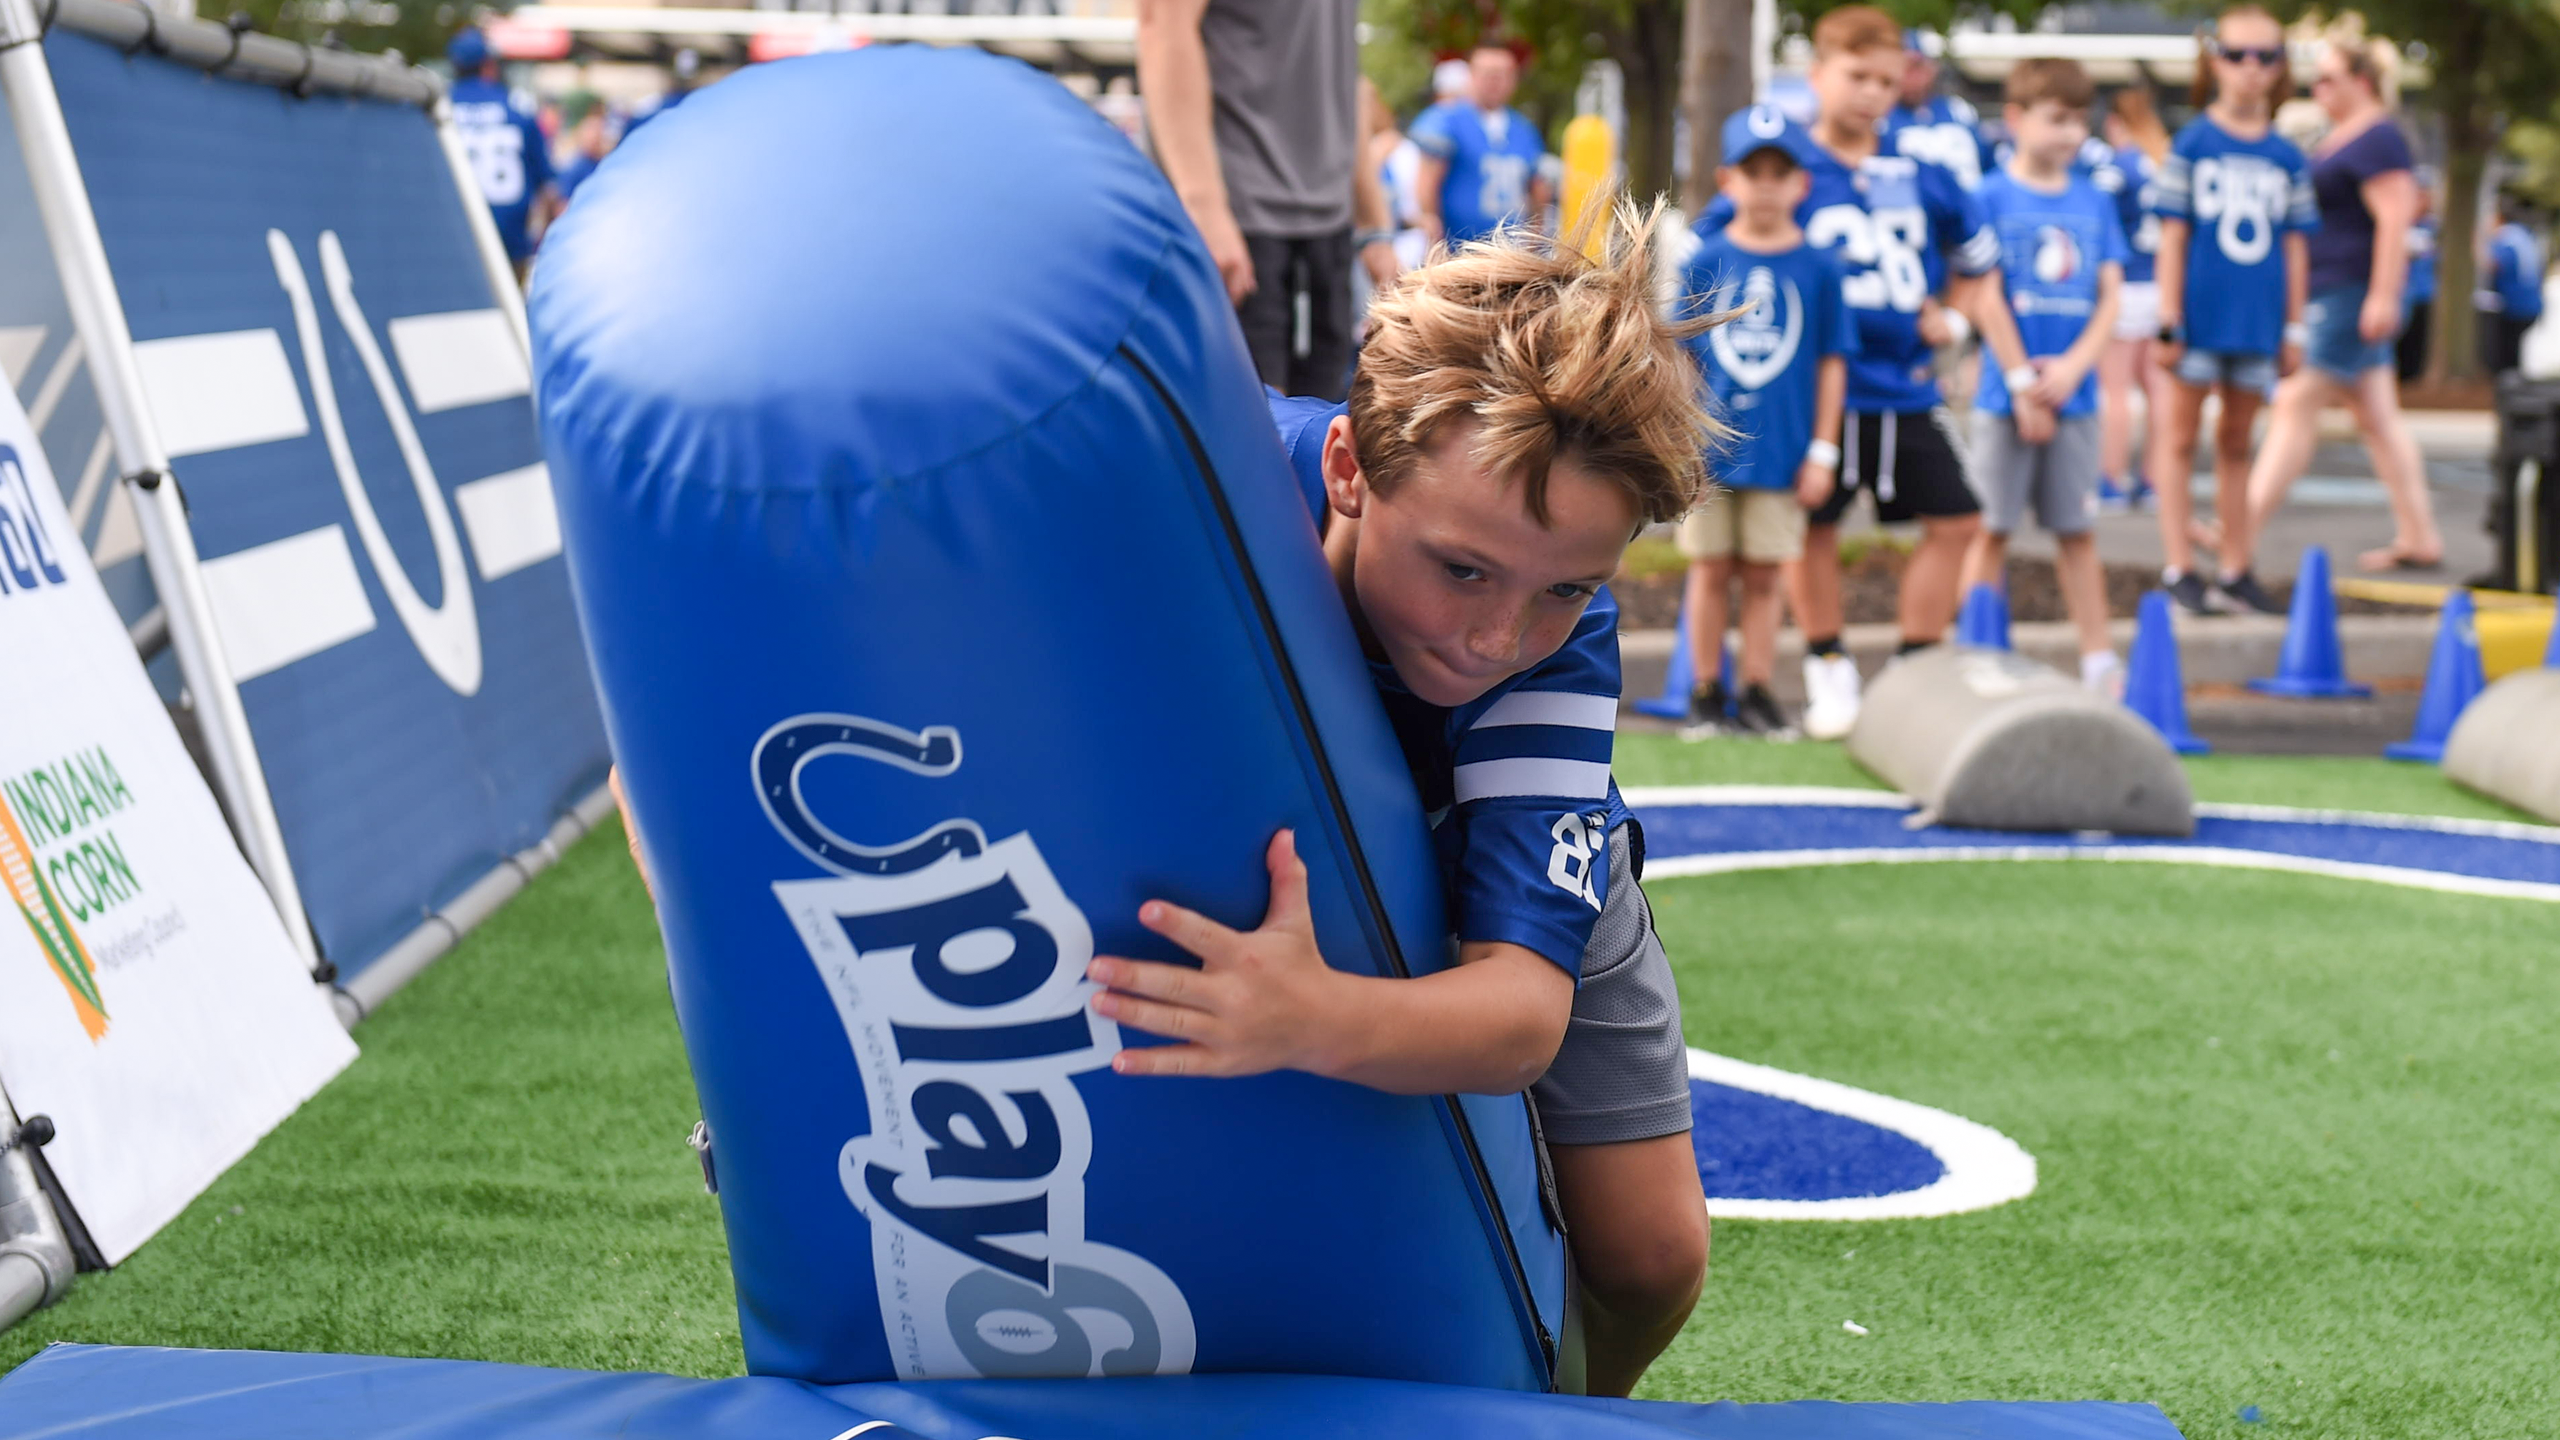 Providing all children with the ultimate football experience